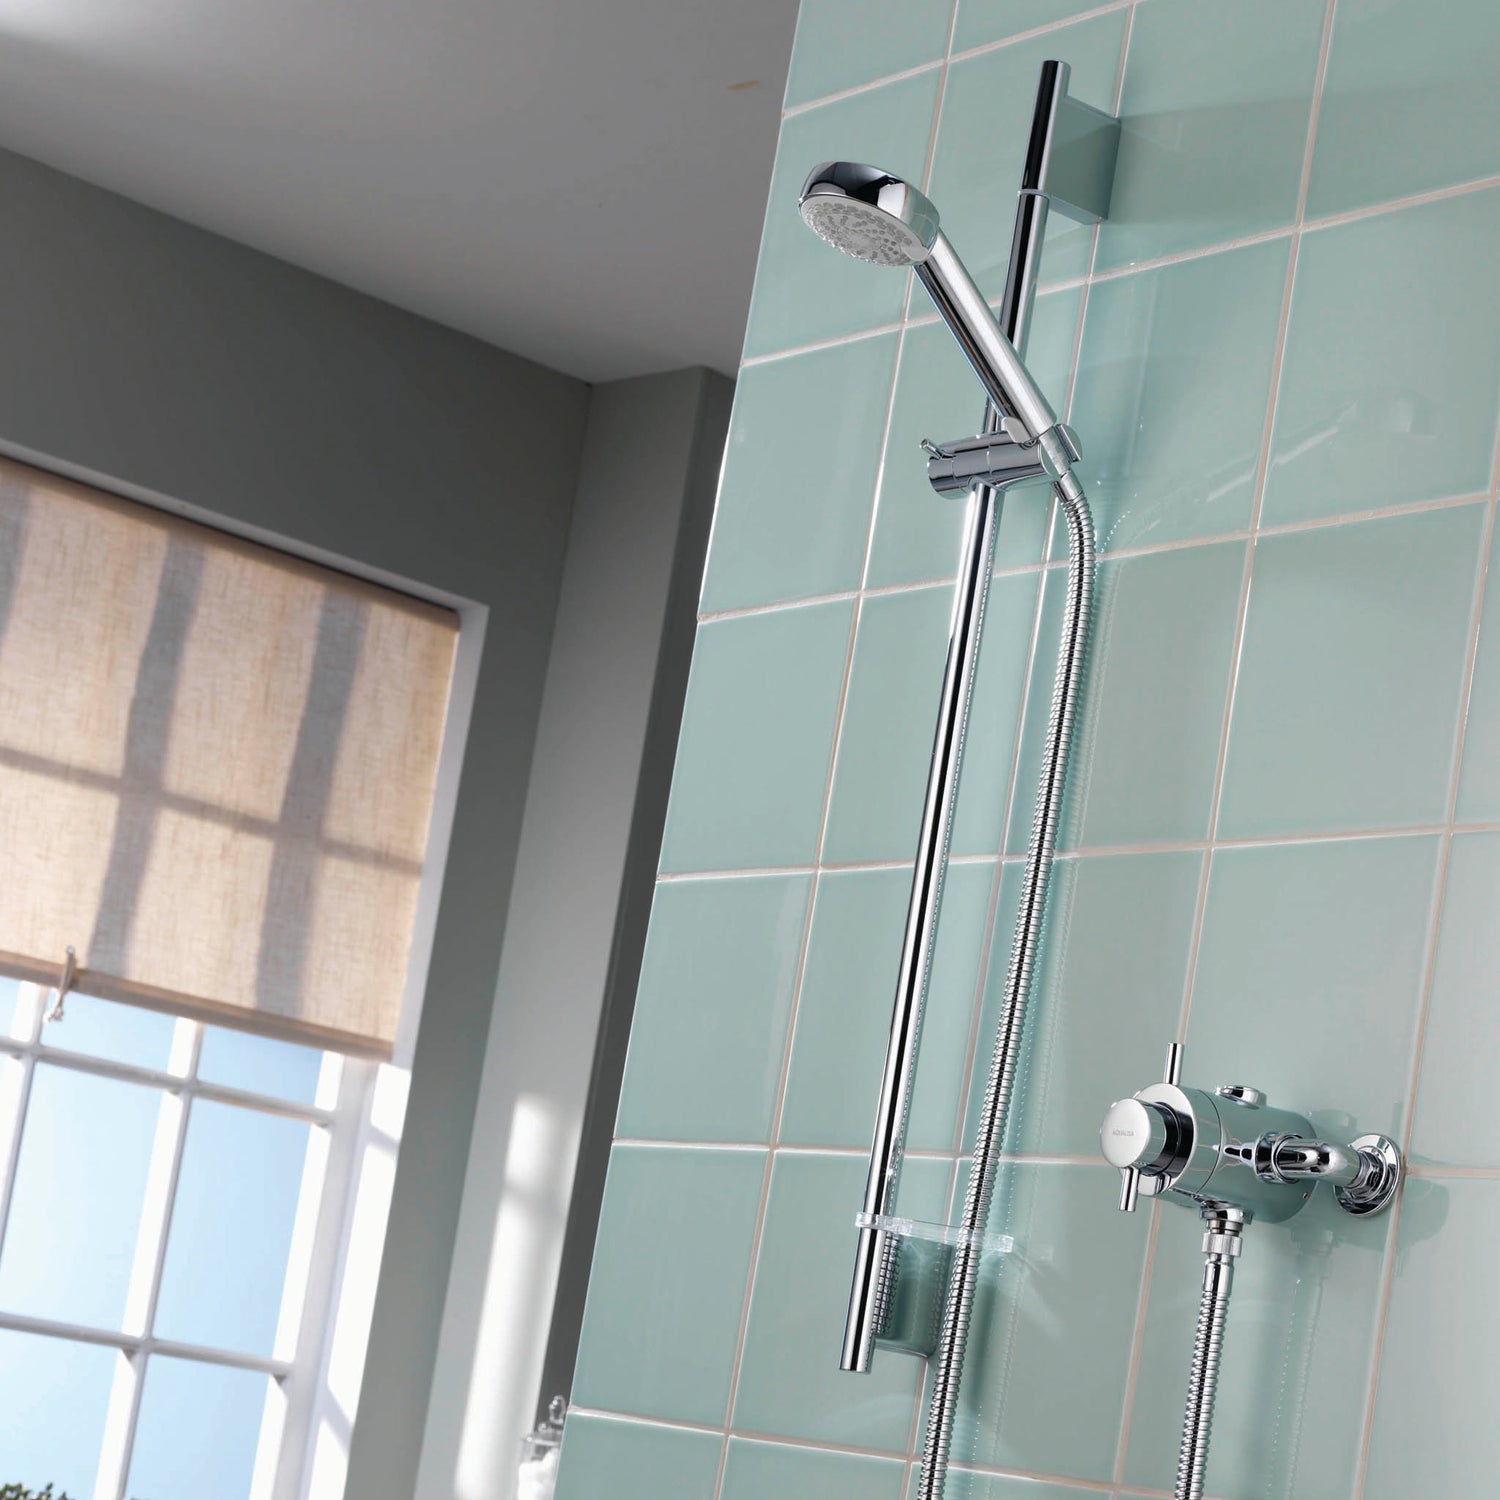 Aqualisa Aspire Mixer Shower with green wall tiles with water flowing ASP001EA